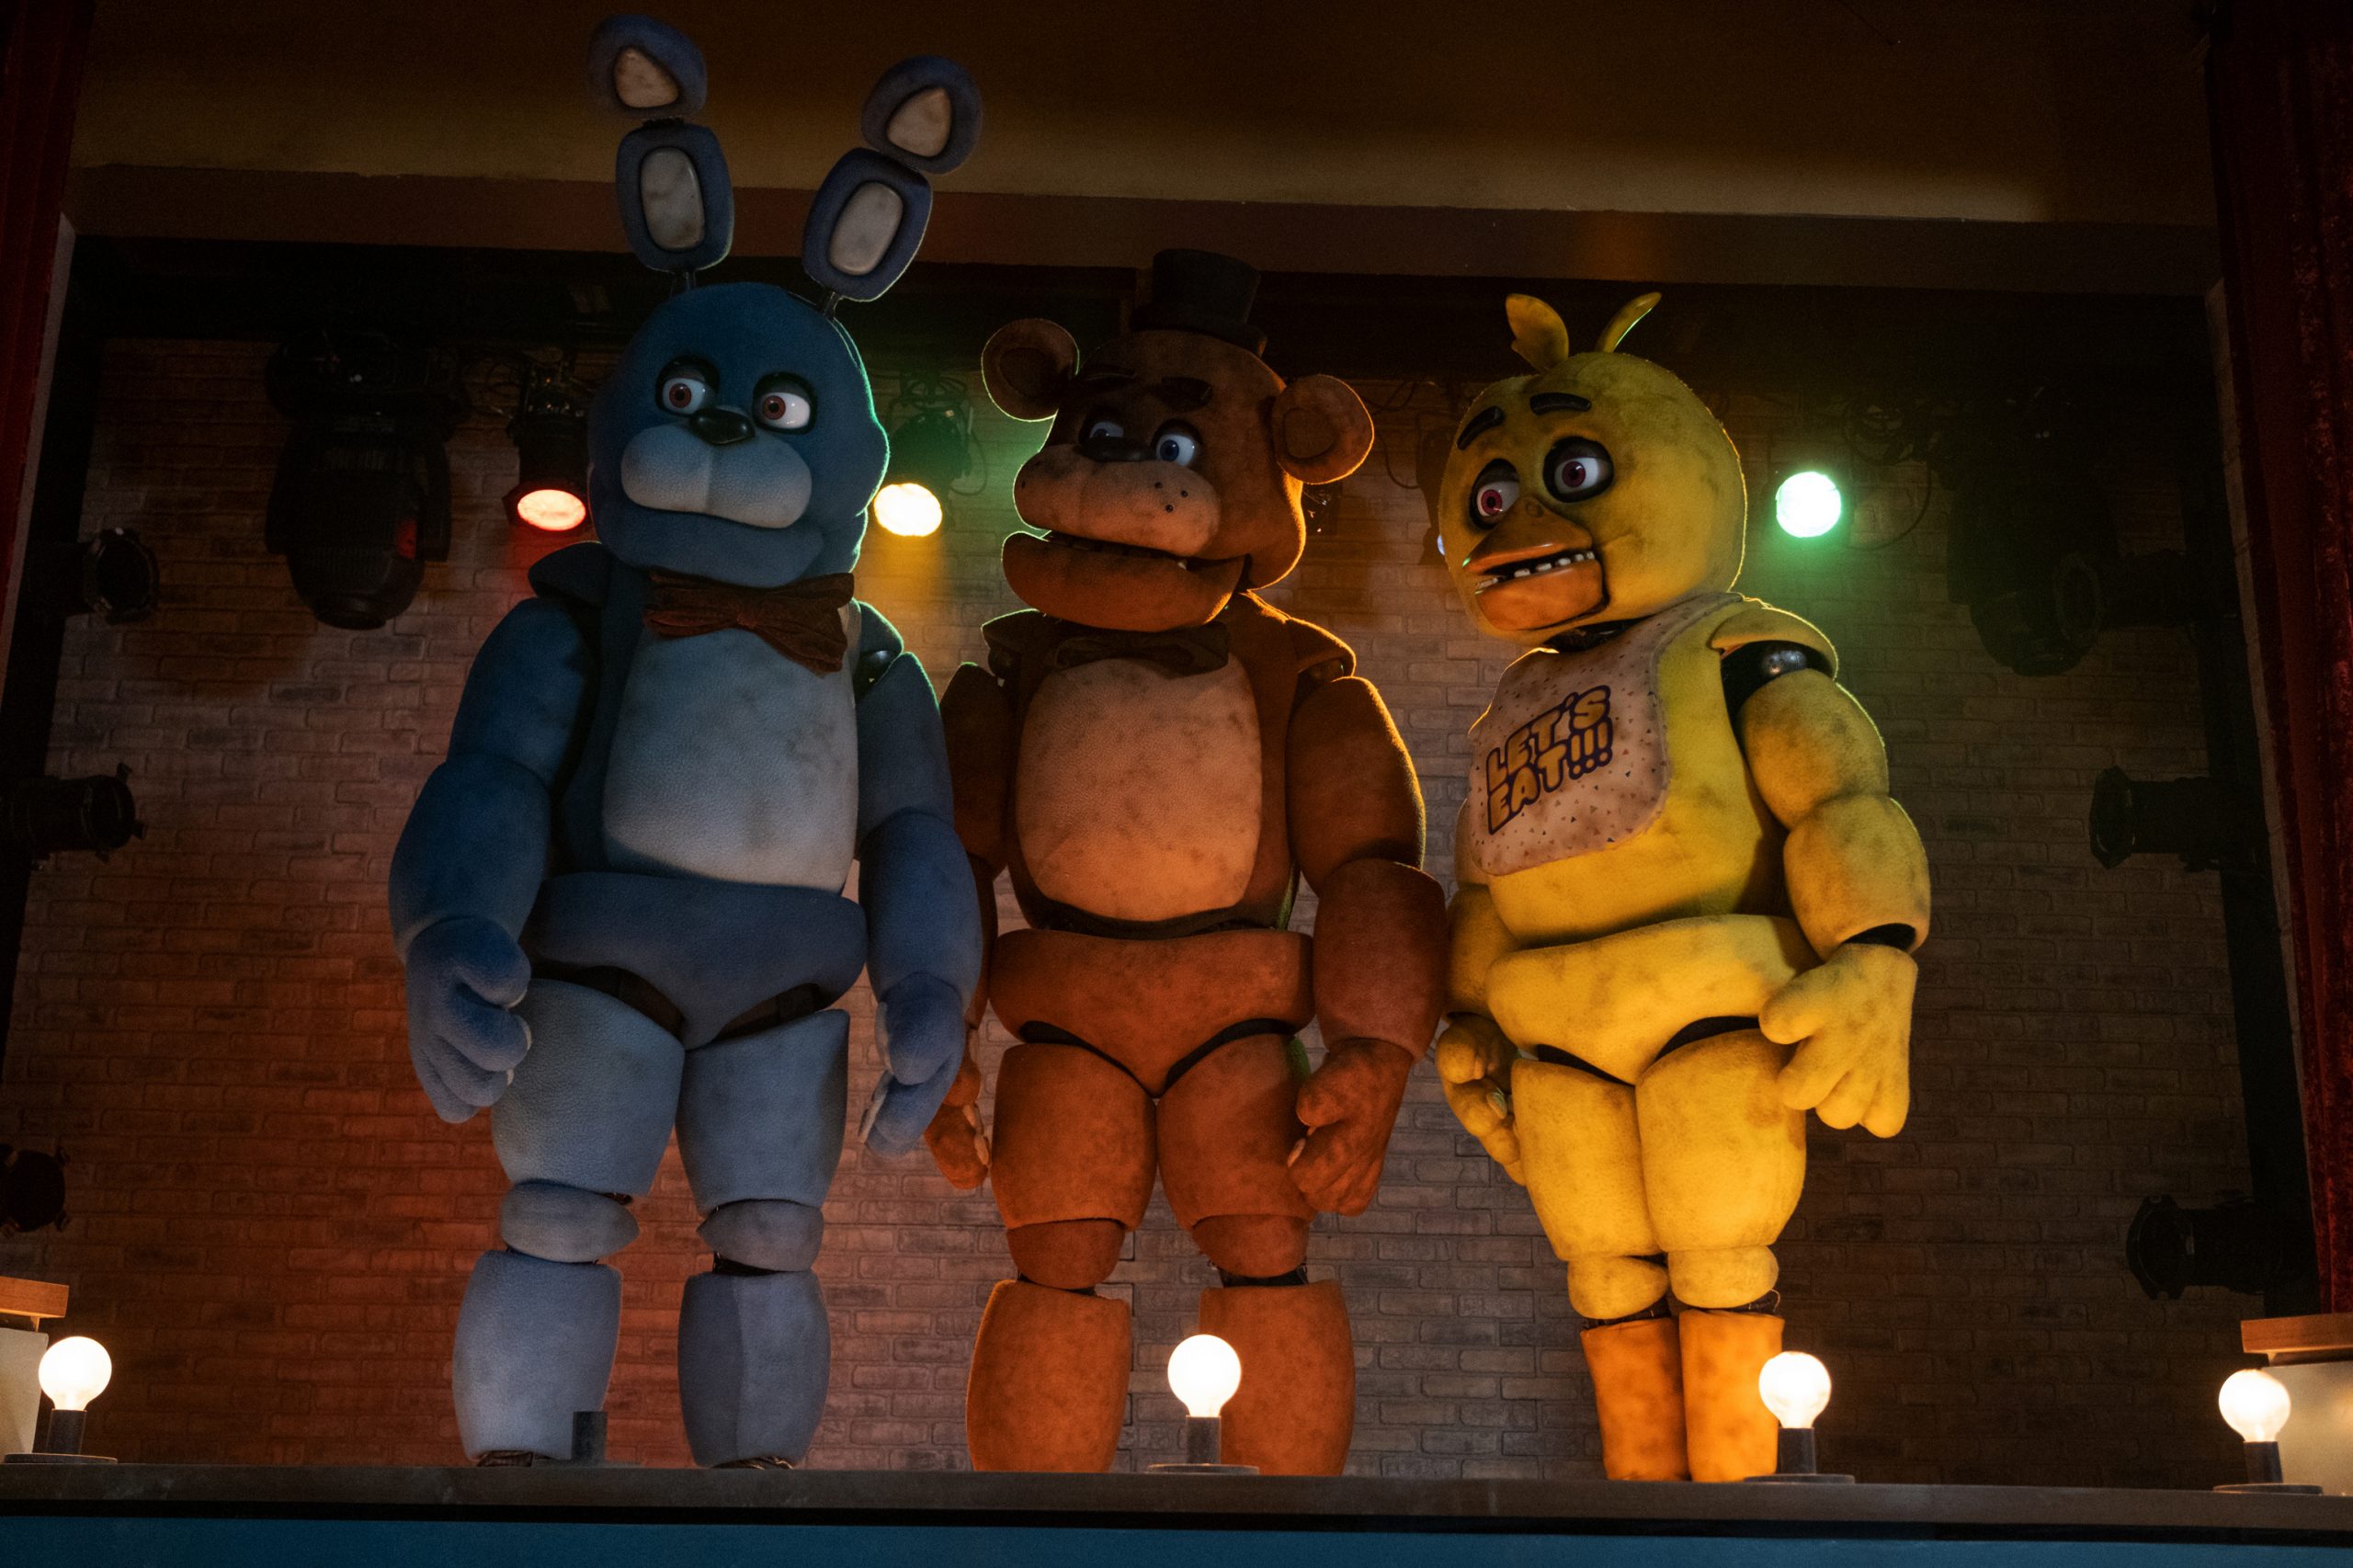 Five Nights at Freddy’s movie mauled by critics as ‘not scary,’ ‘bloodless,’ and ‘puzzling’